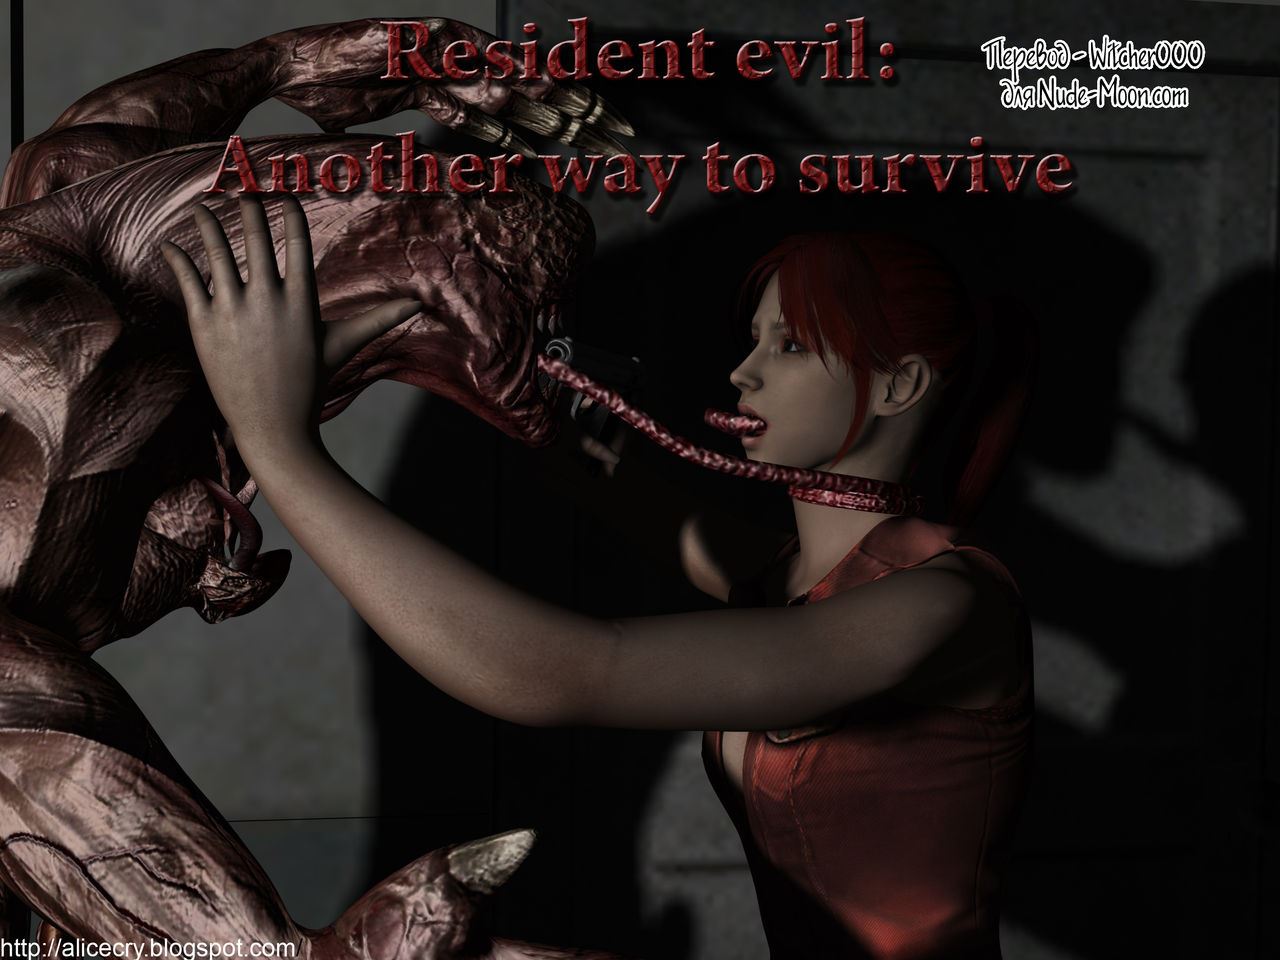 Resident evil Another way to survive comix Russian Witcher000 00